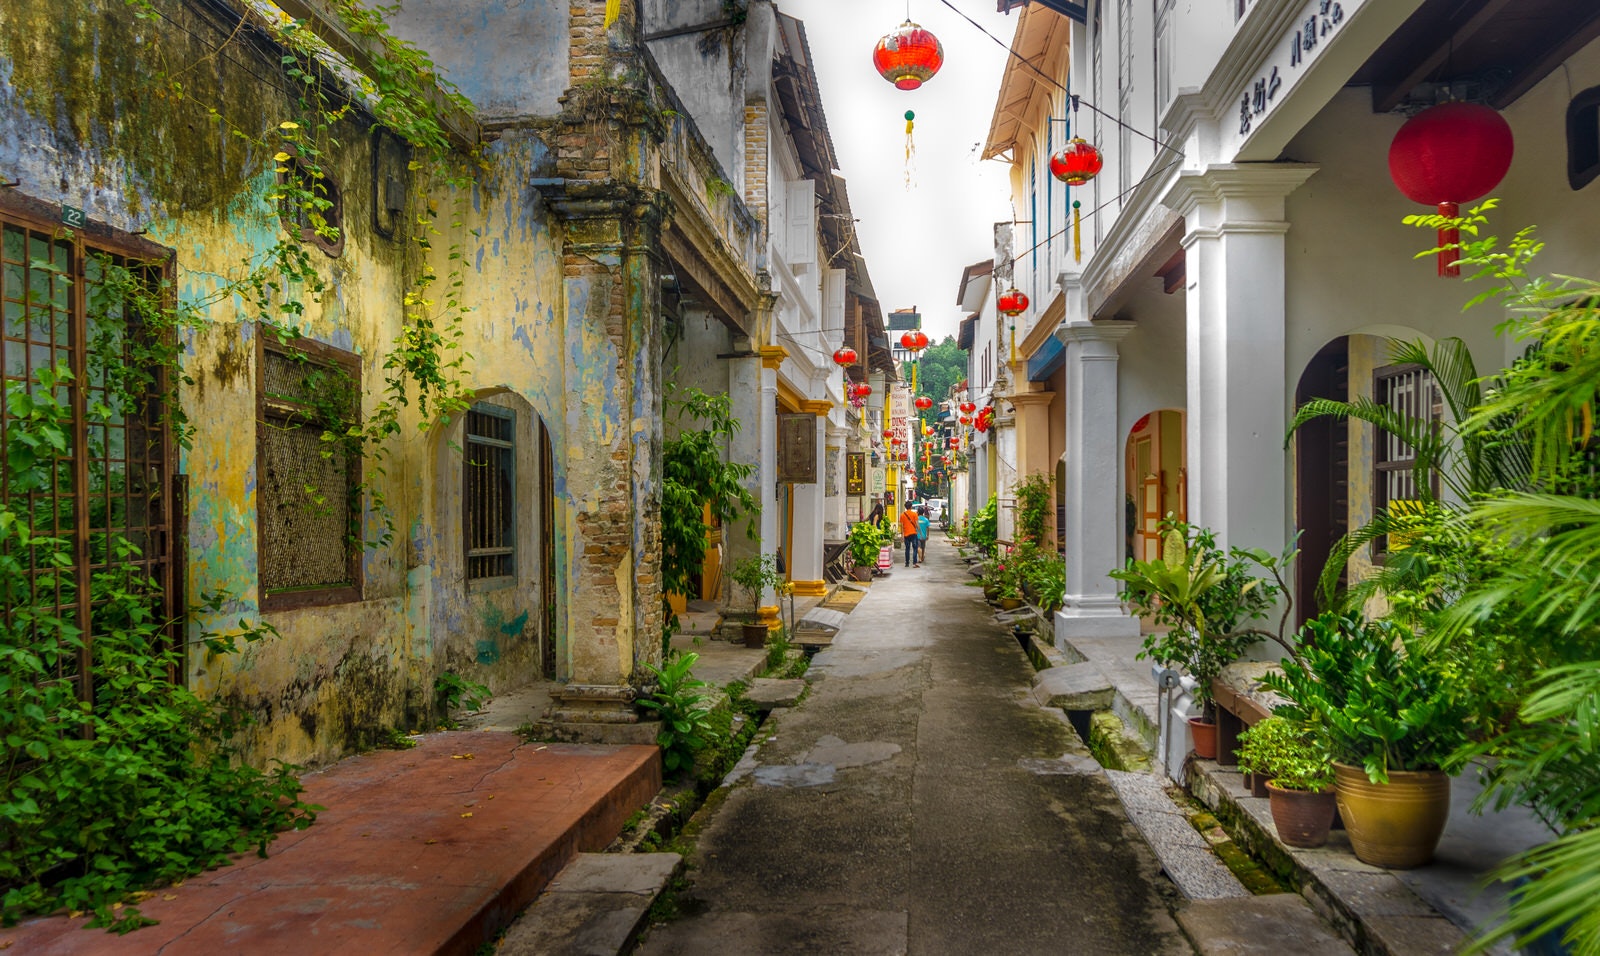 A crumbling colonial backstreet in Ipoh old town